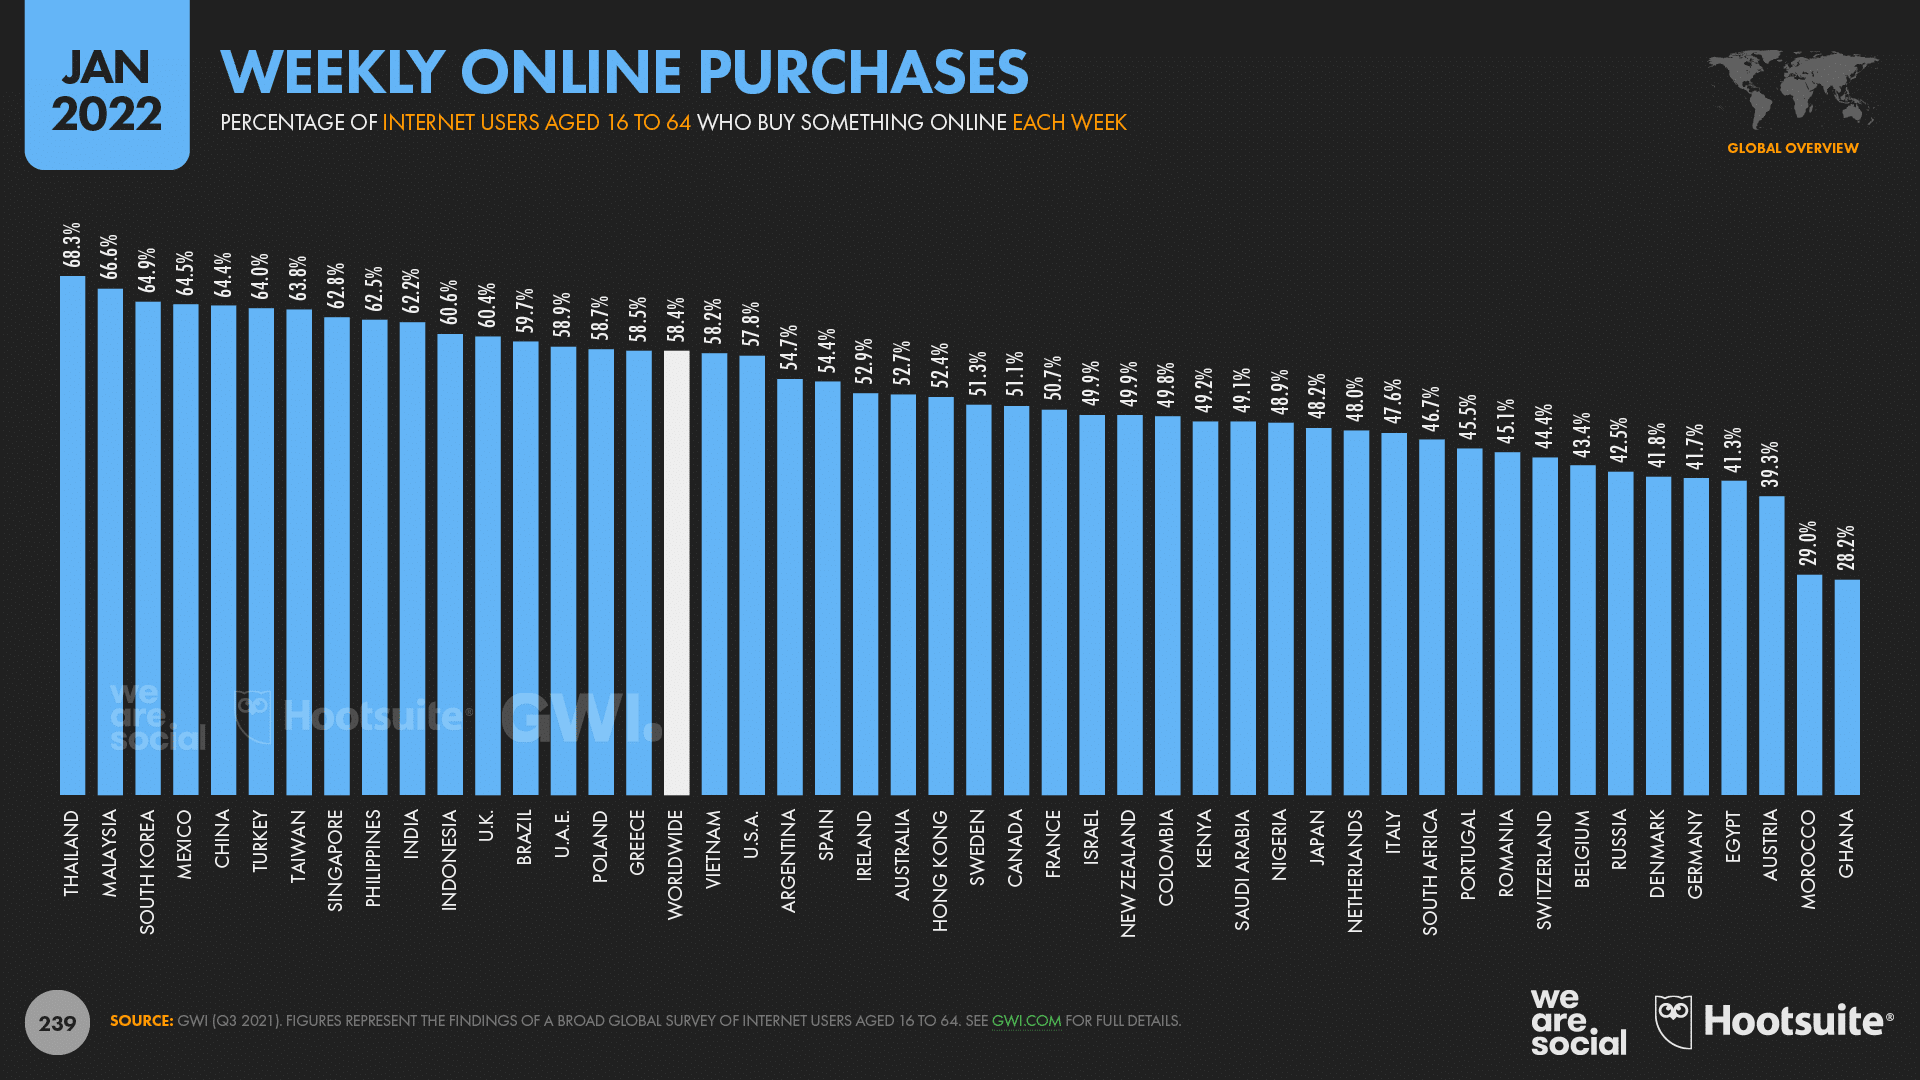 chart showing weekly online purchases